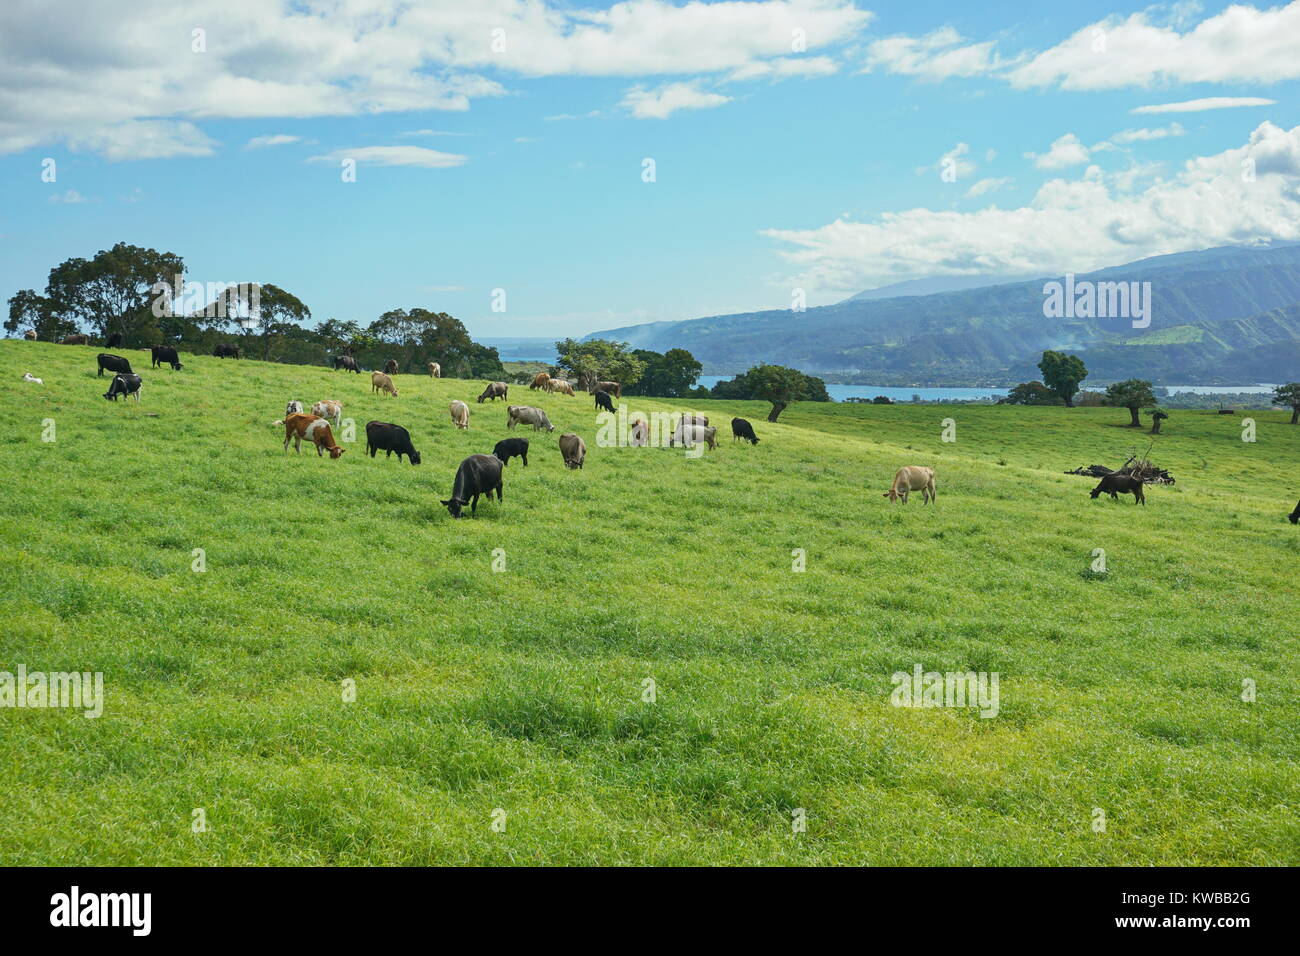 Cows in a grass field on the island of Tahiti, plateau of Taravao, French Polynesia, south Pacific ocean Stock Photo